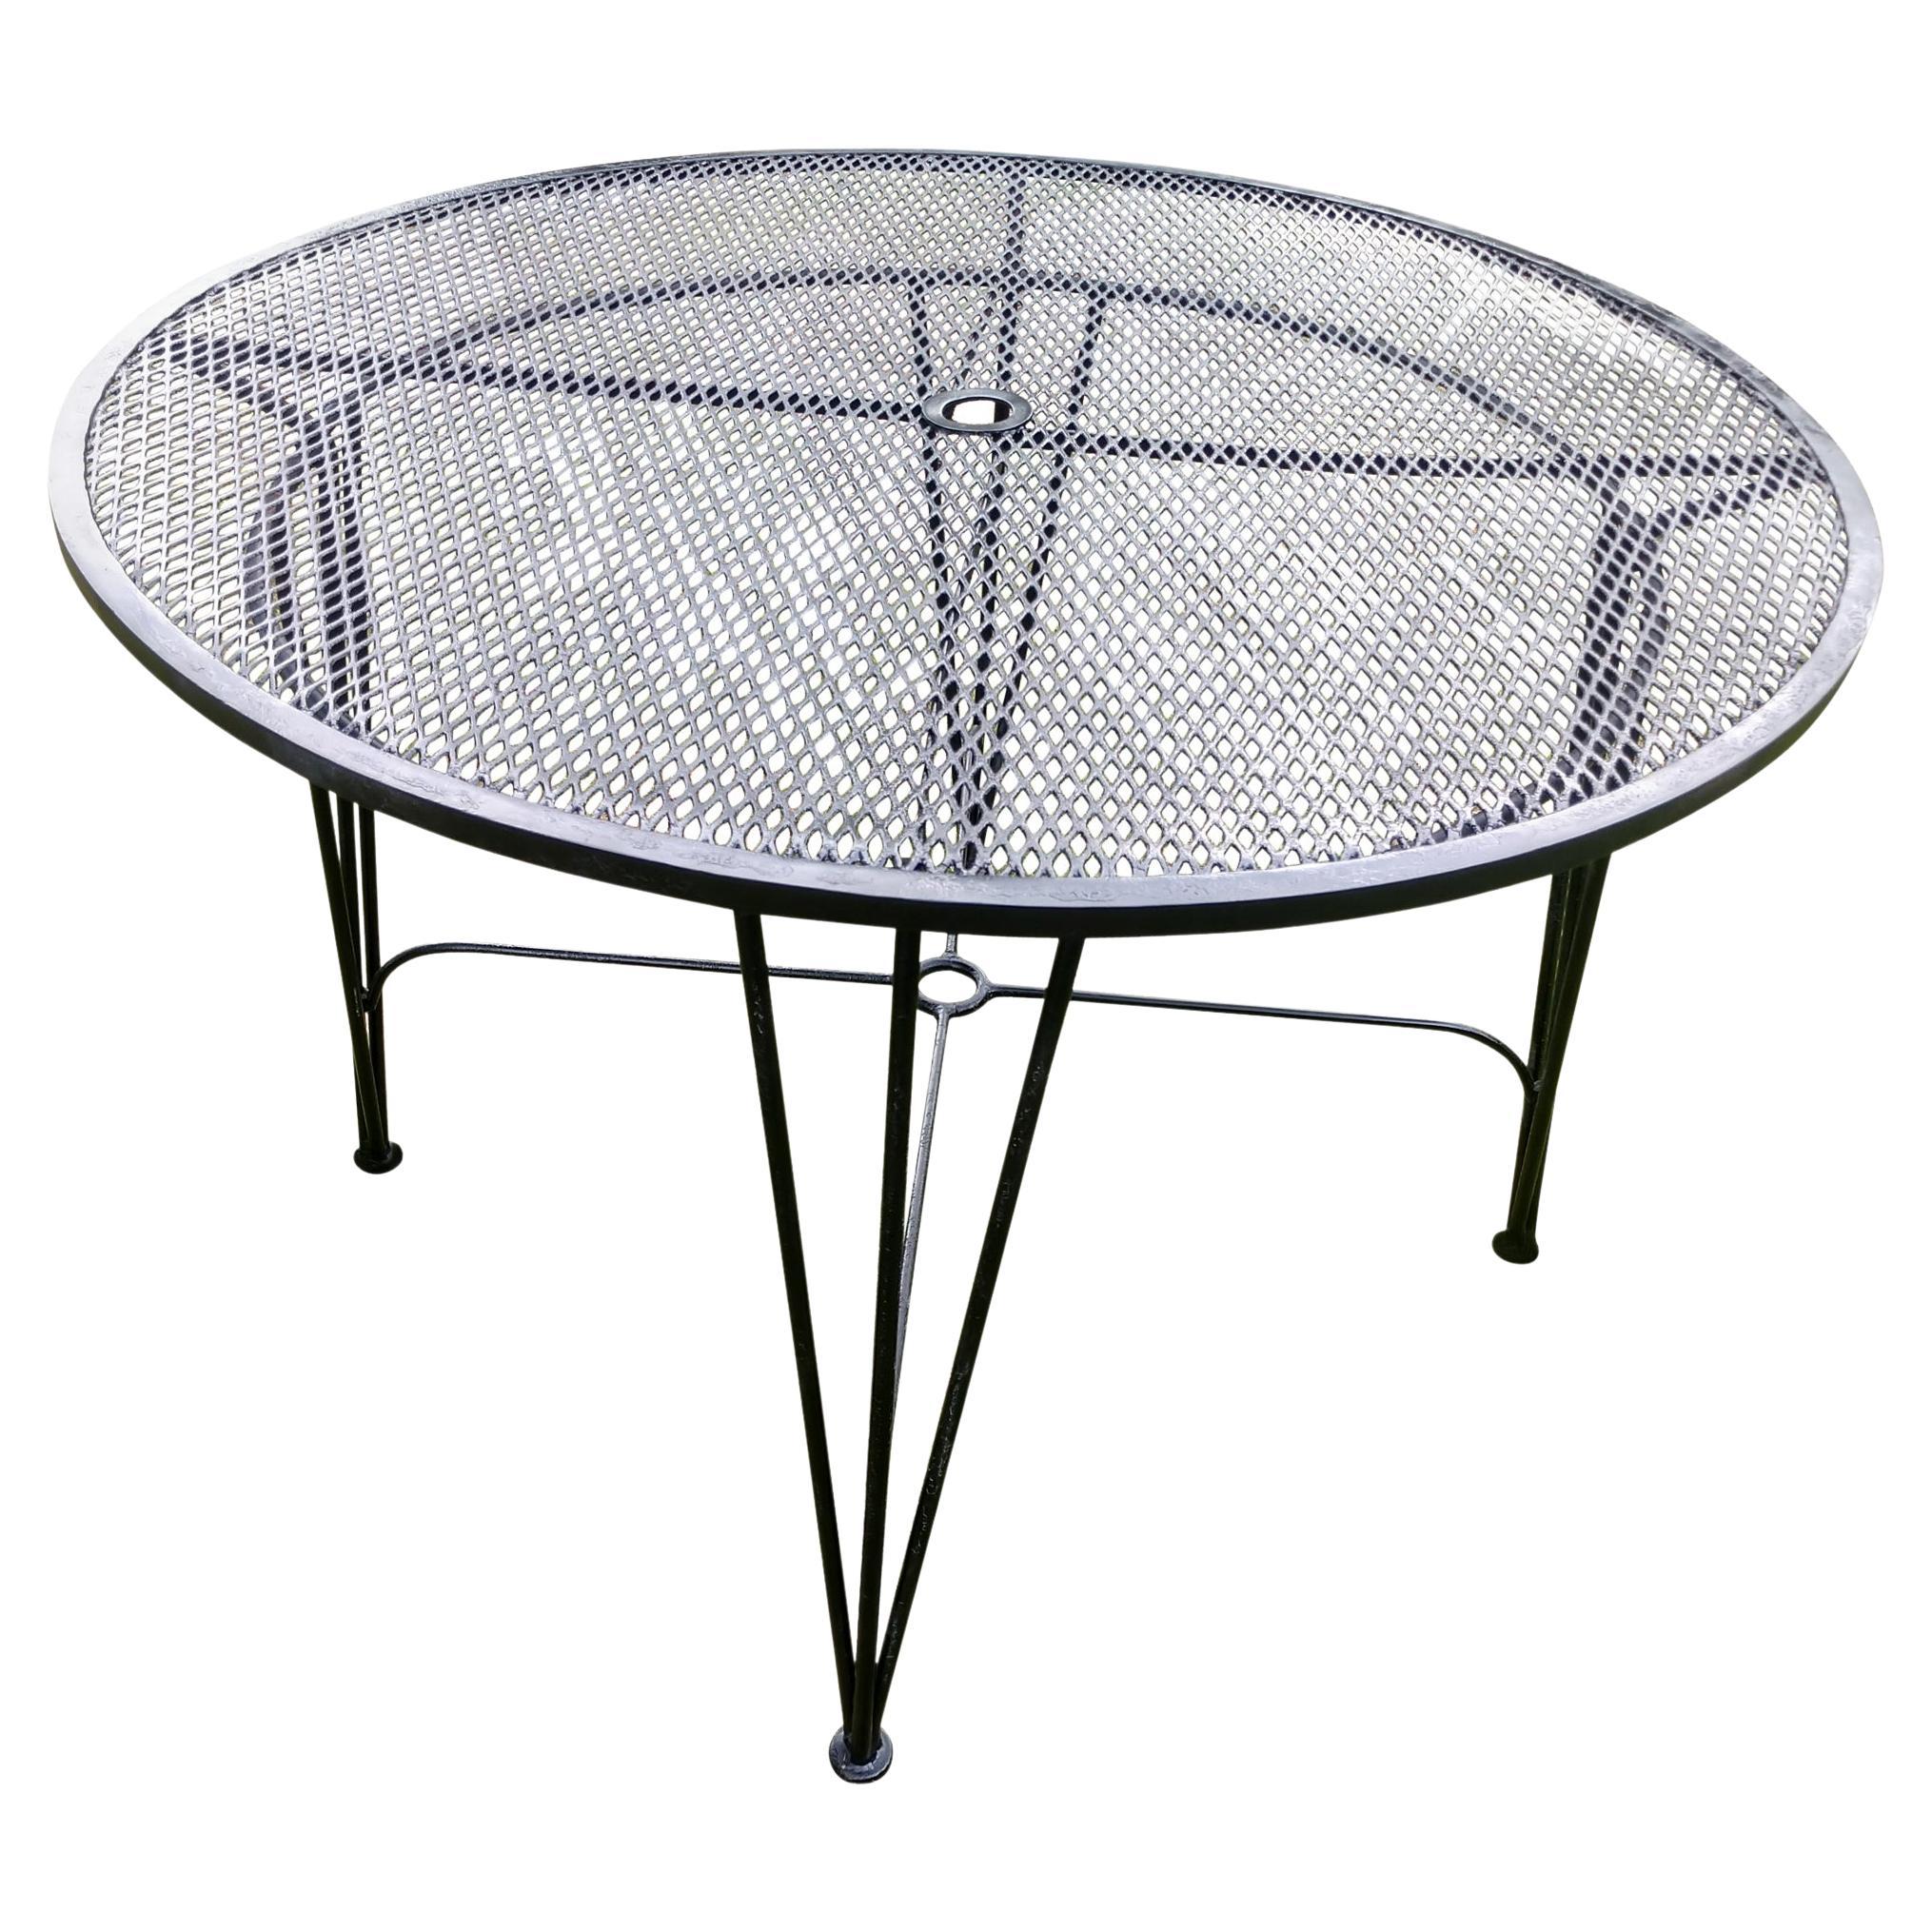 Mid-Century Modern Round Mesh Top Outdoor Dining Table by John Salterini For Sale